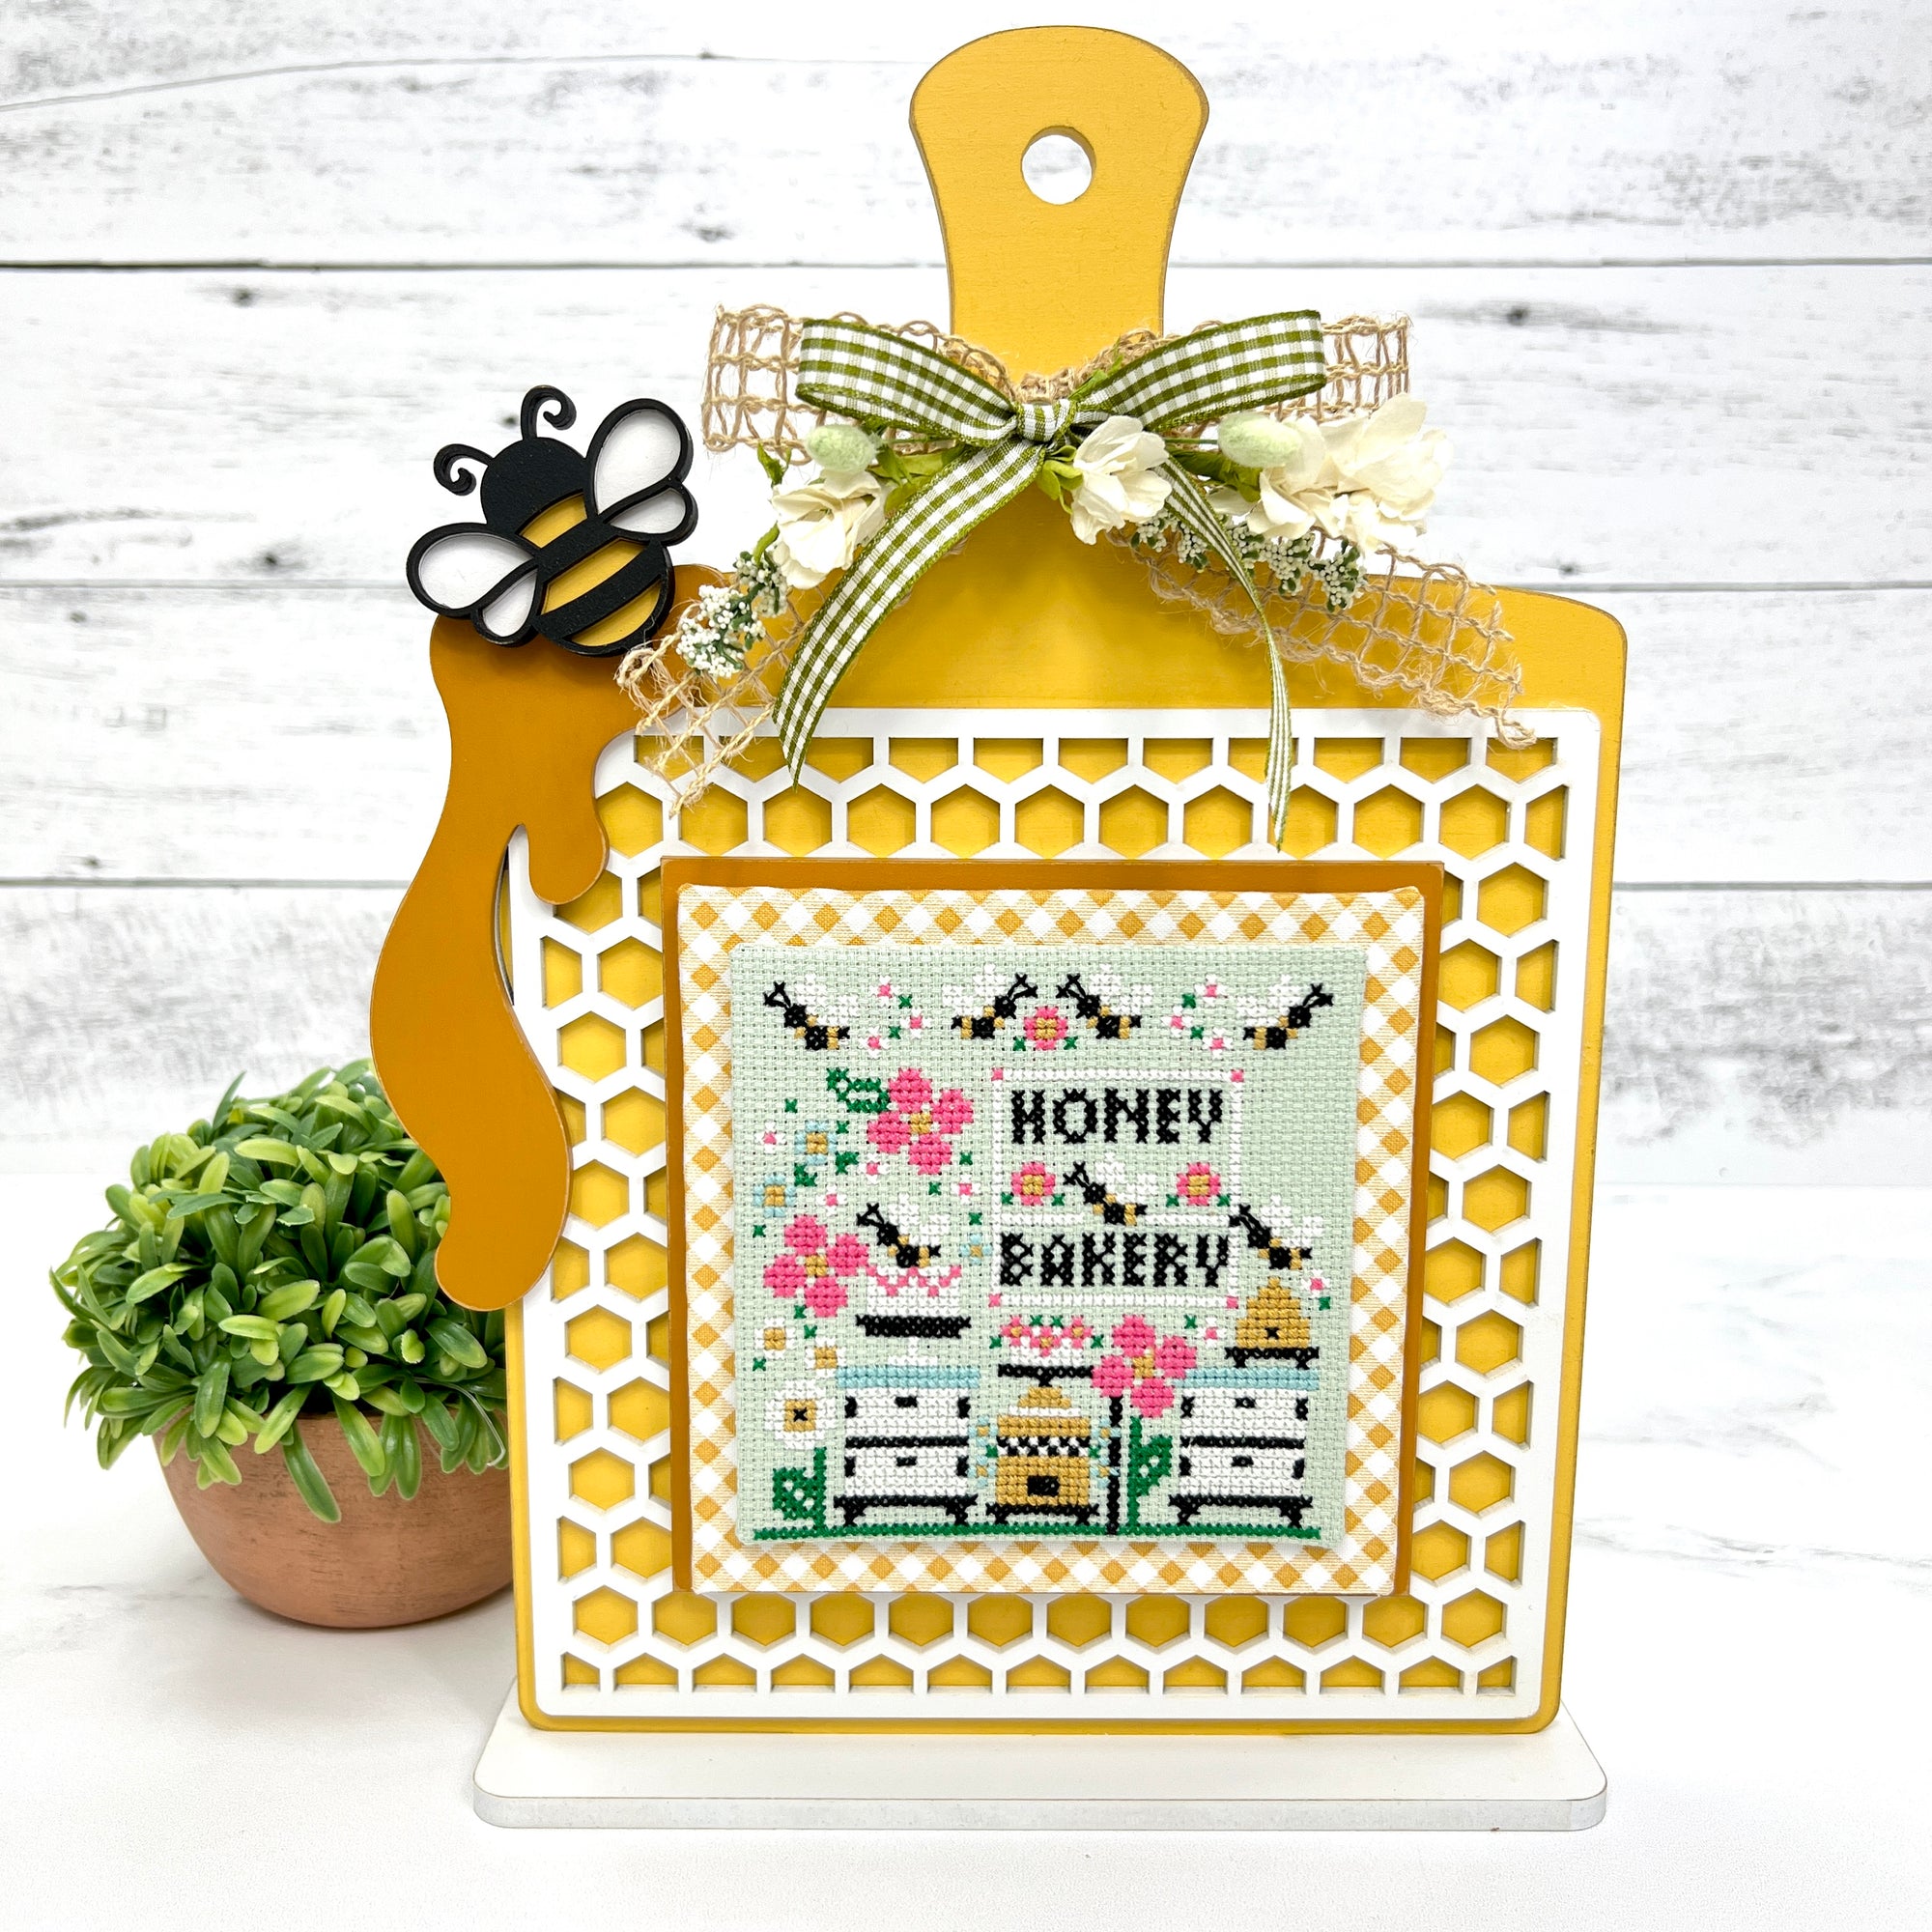 Recipe board with honeycomb front and bumble bee cross stitch display backing